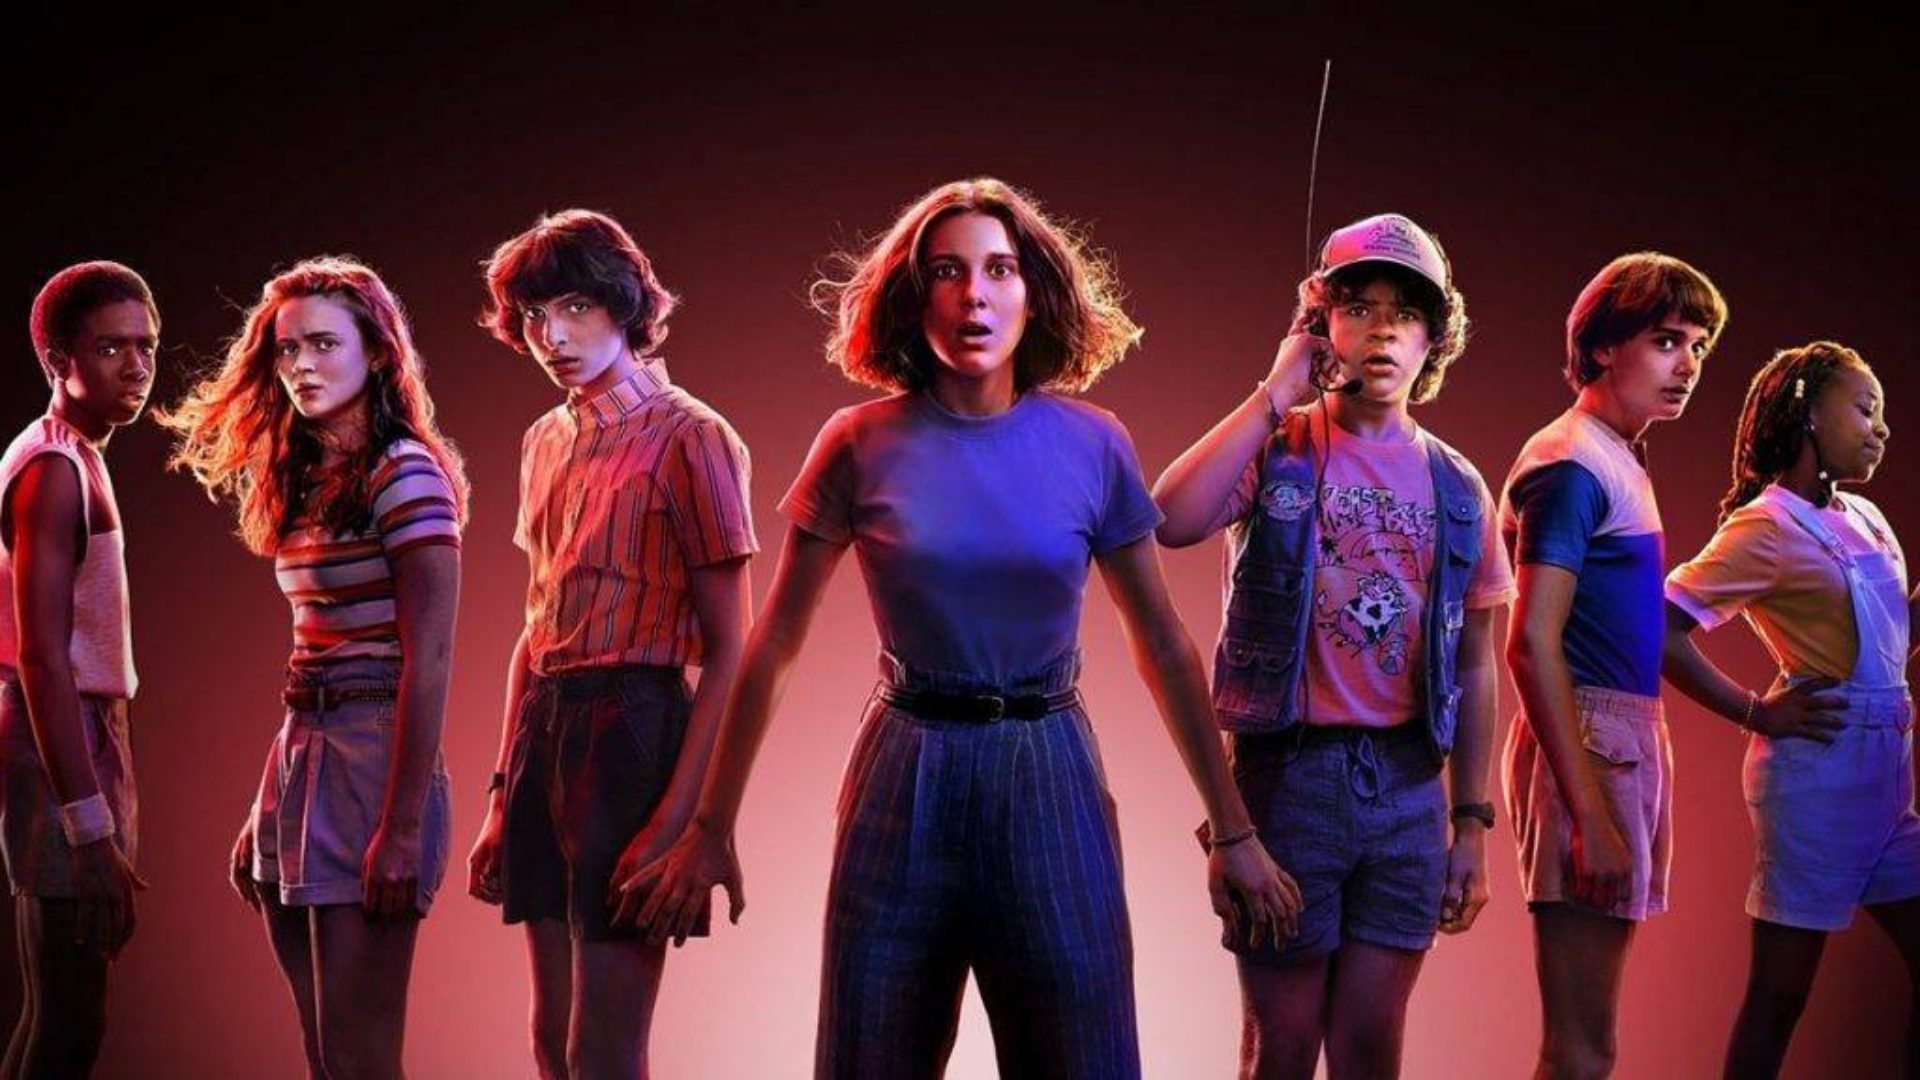 Stranger Things - The Experience